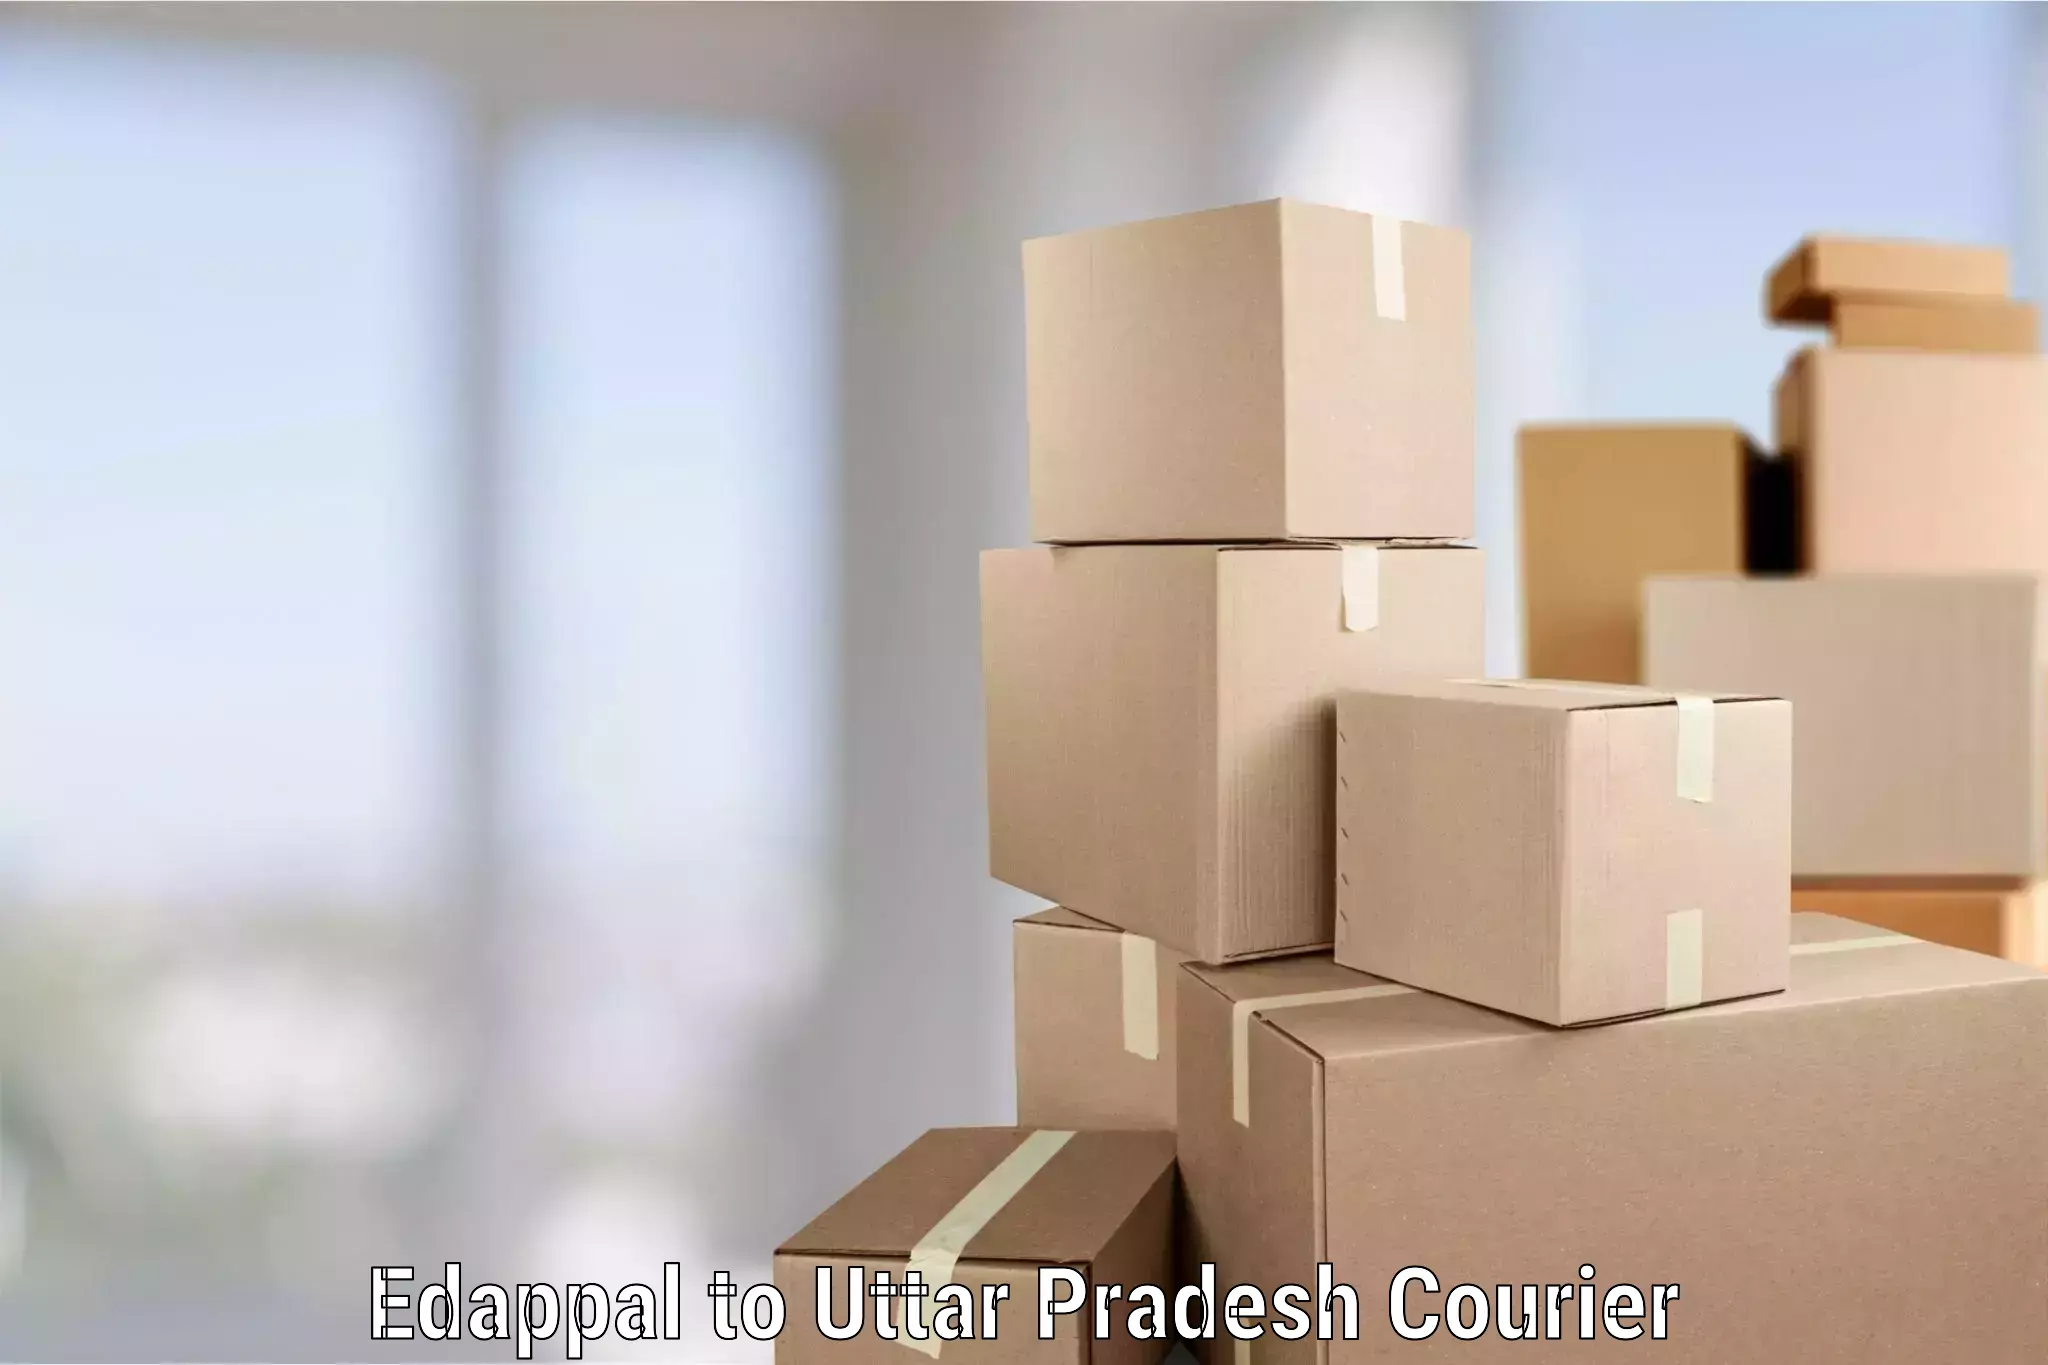 Residential relocation services Edappal to Orai